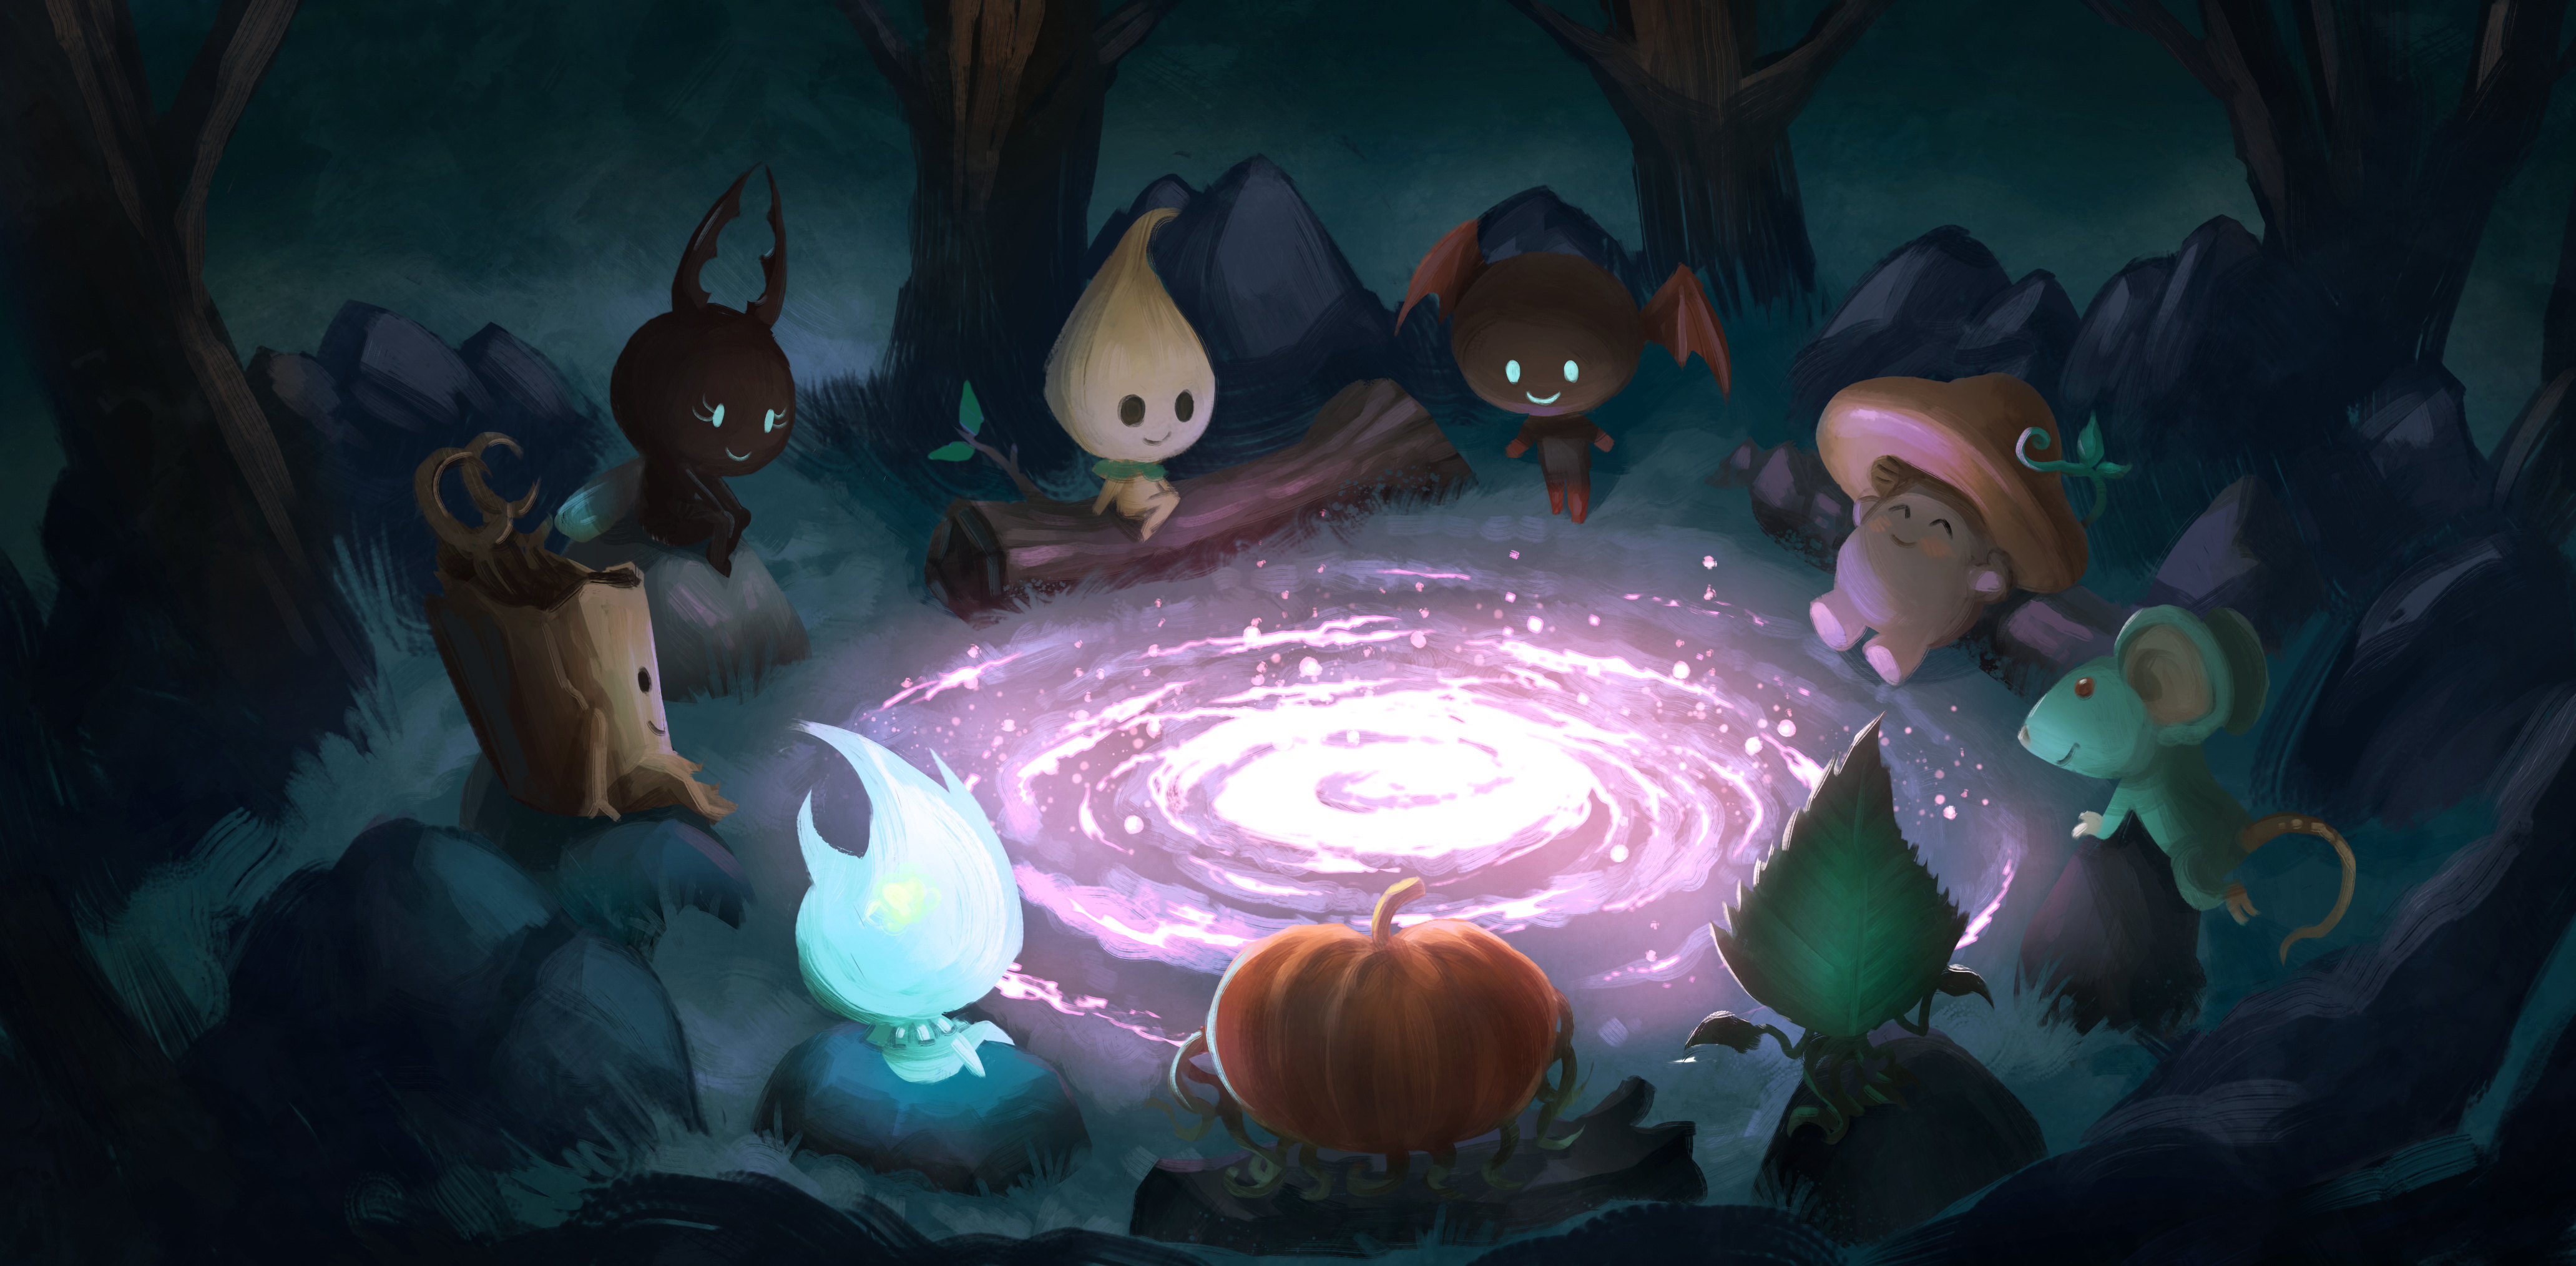 Spritely characters sitting campfire-style around a newly formed universe